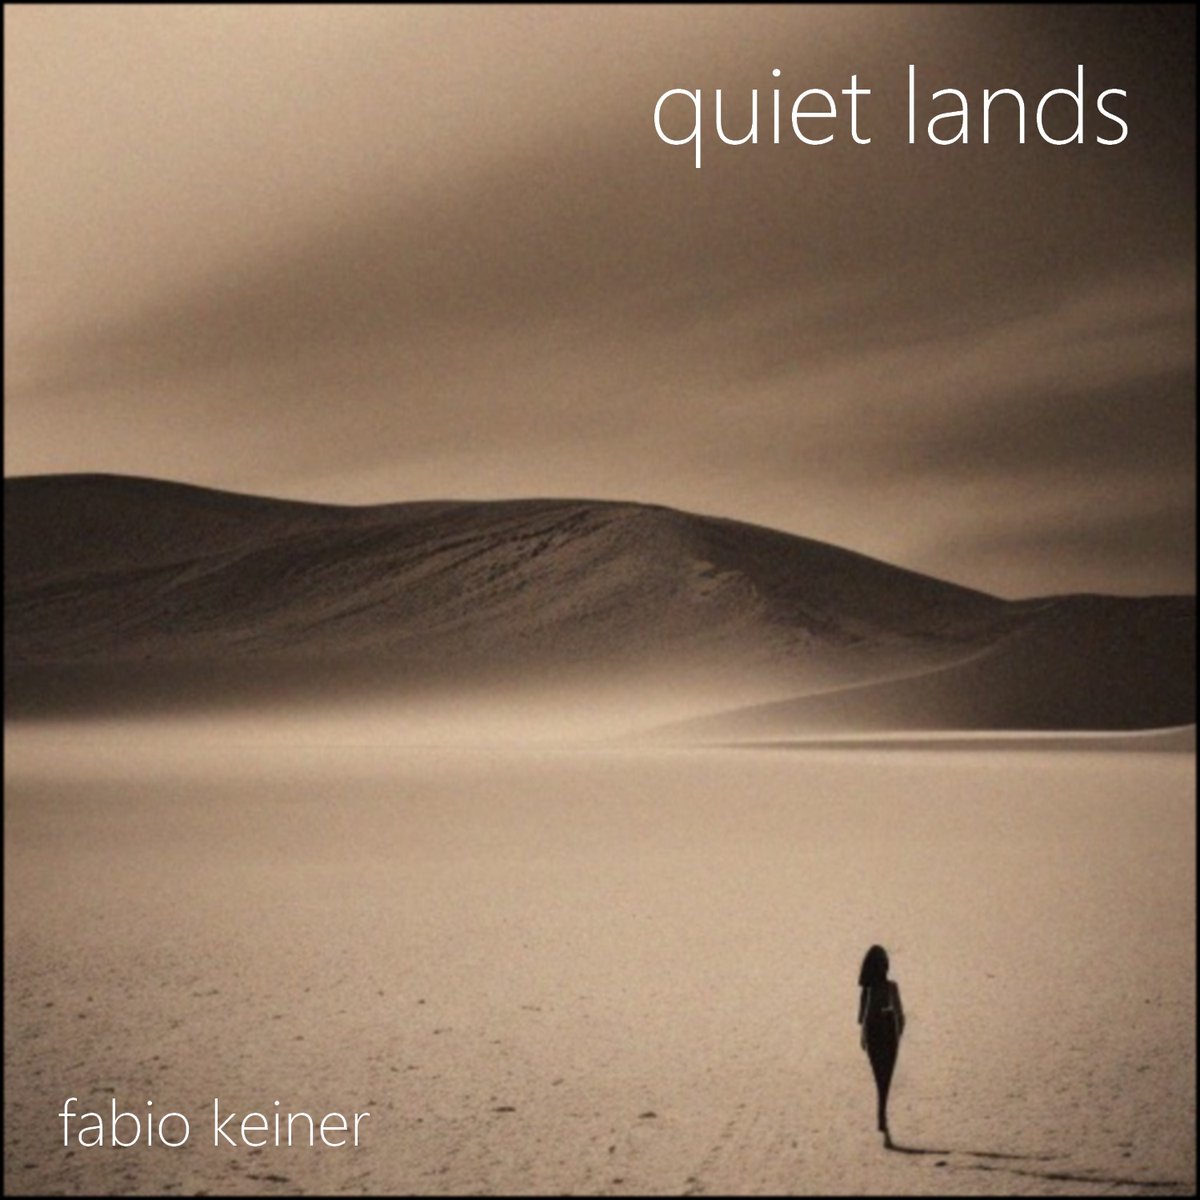 New release at Enough Records, meditative ambient drone album by Austrian artist Fabio Keiner with his album Quiet Lands. Available free for download at our website and all the usual places. #netaudio #ccmusic #droneambient #ambientmusic #meditativemusic enoughrecords.scene.org/release/enrmp5…